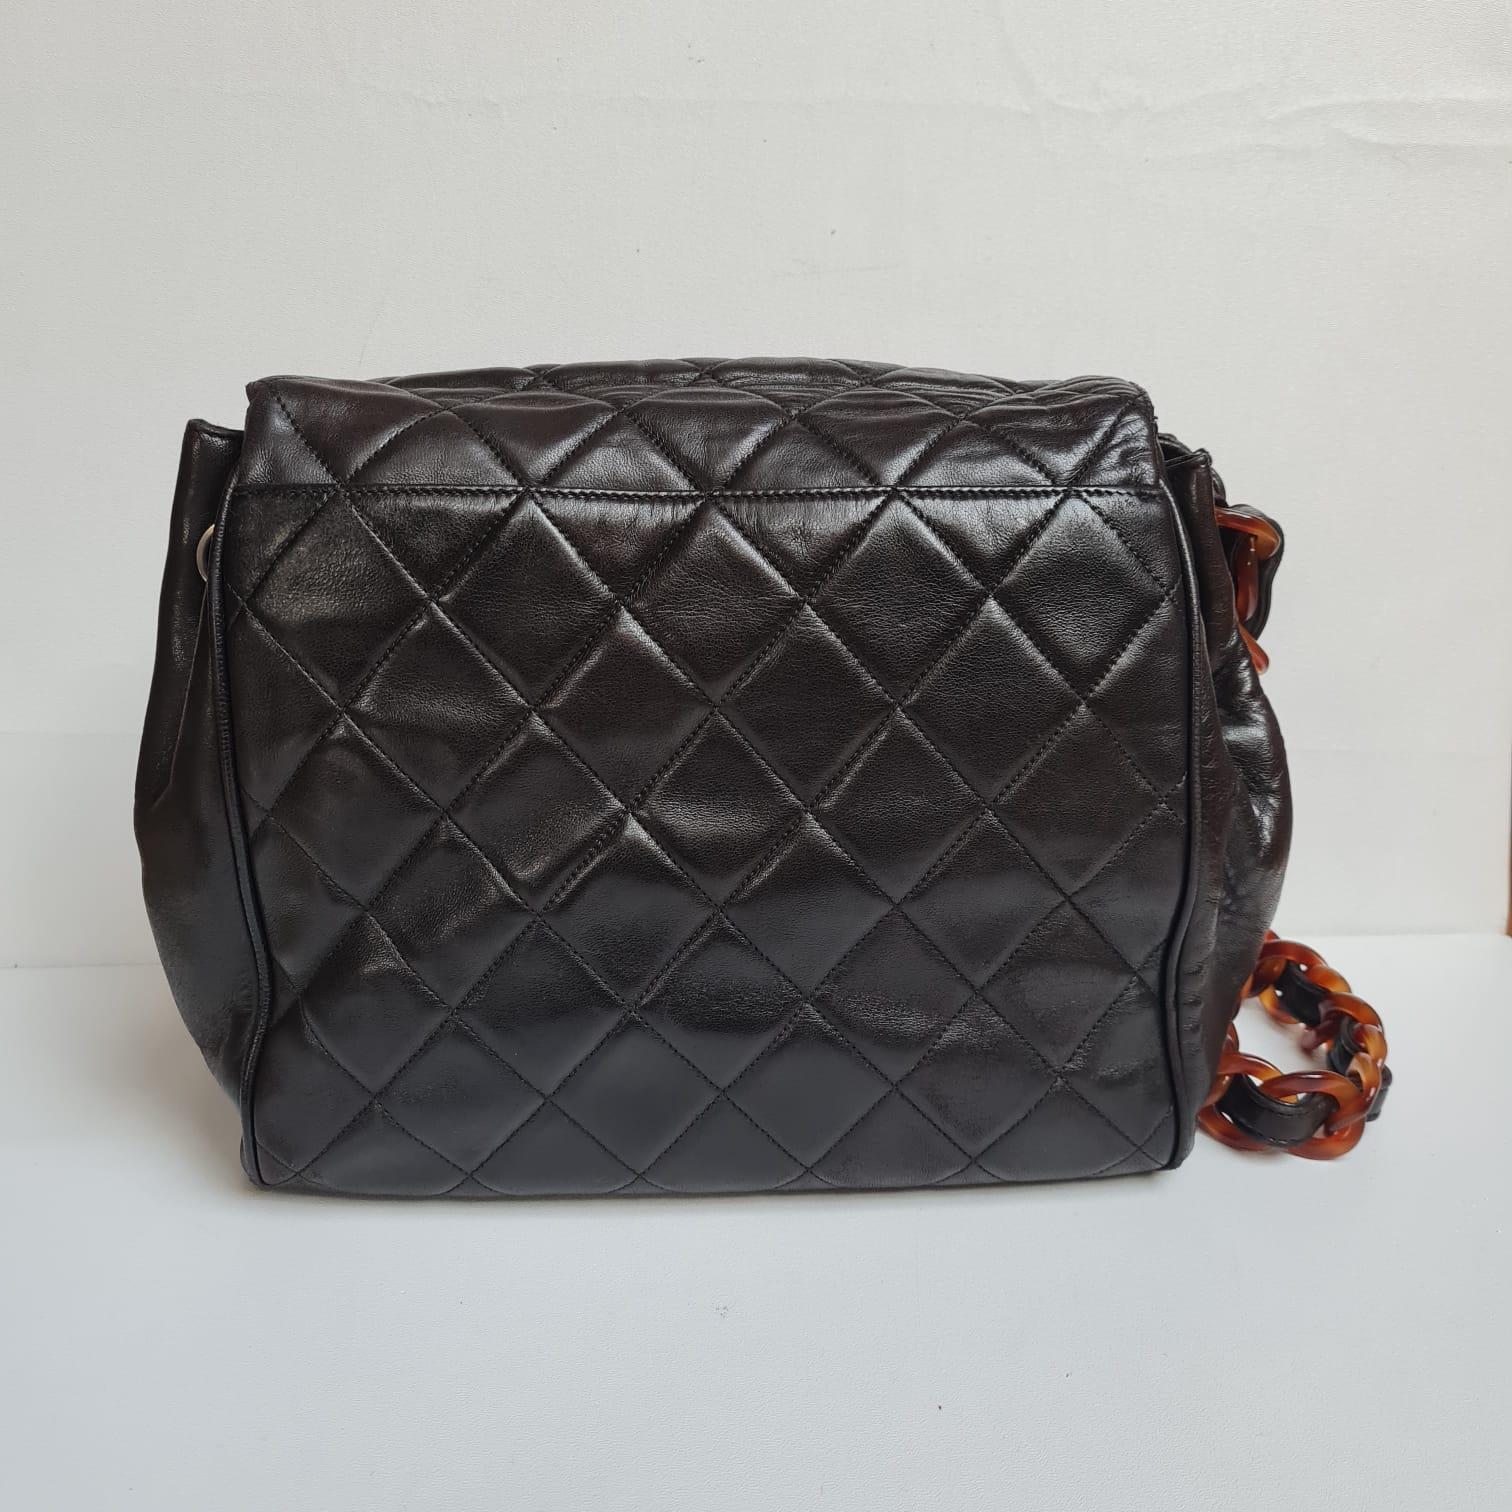 Rare Vintage 1990s Chanel Black Quilted Tortoiseshell Round Flap Bag For Sale 11